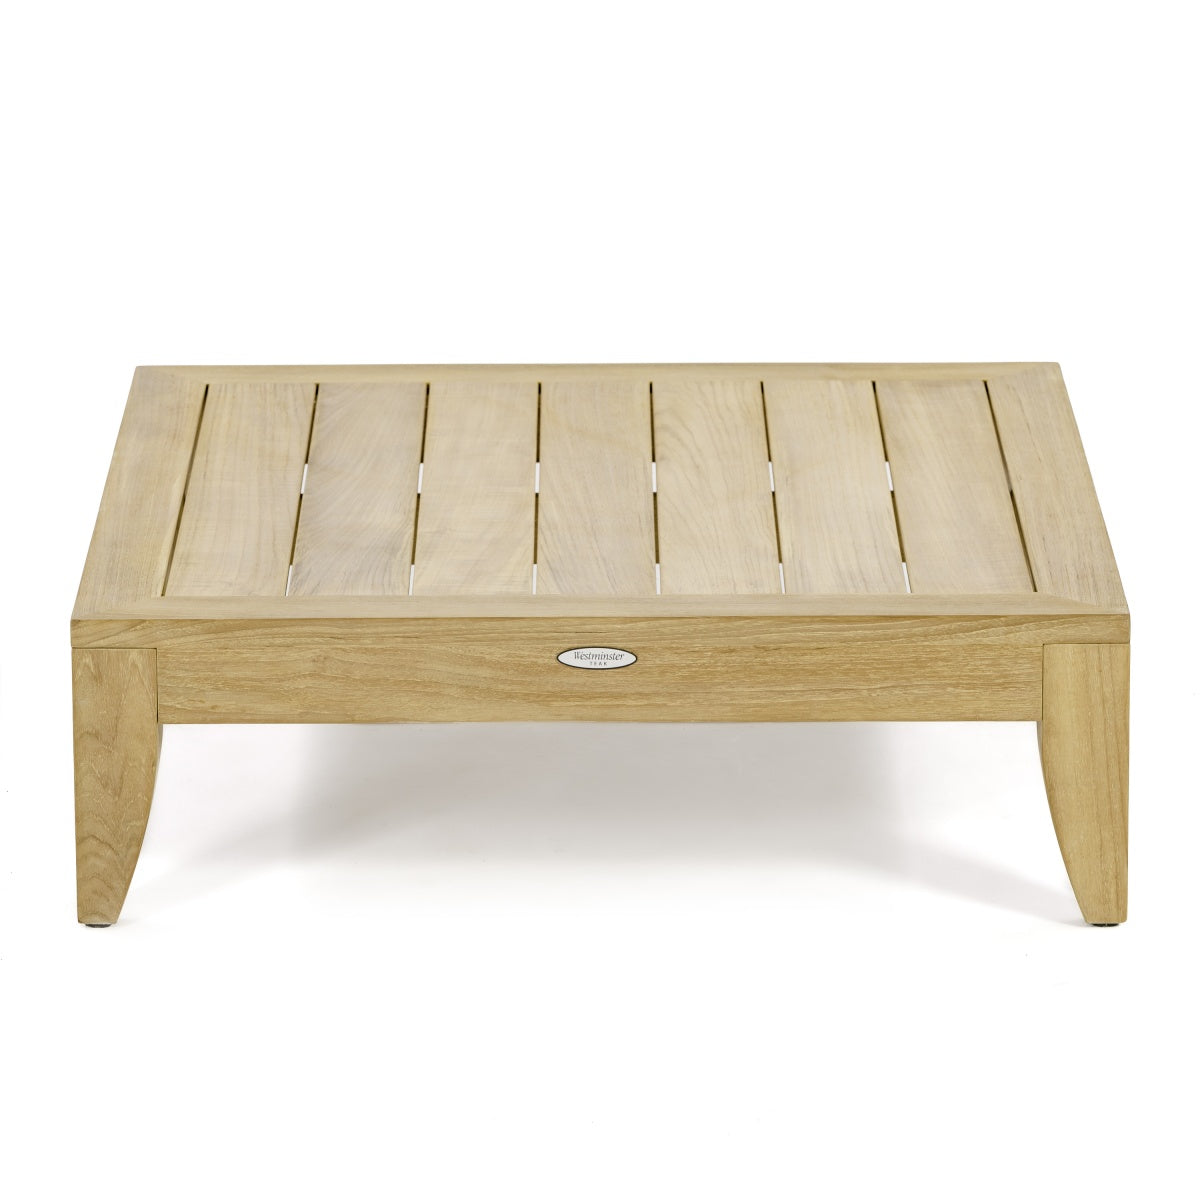 Westminster Teak - Aman Dais Coffee Table Low Table - 14315